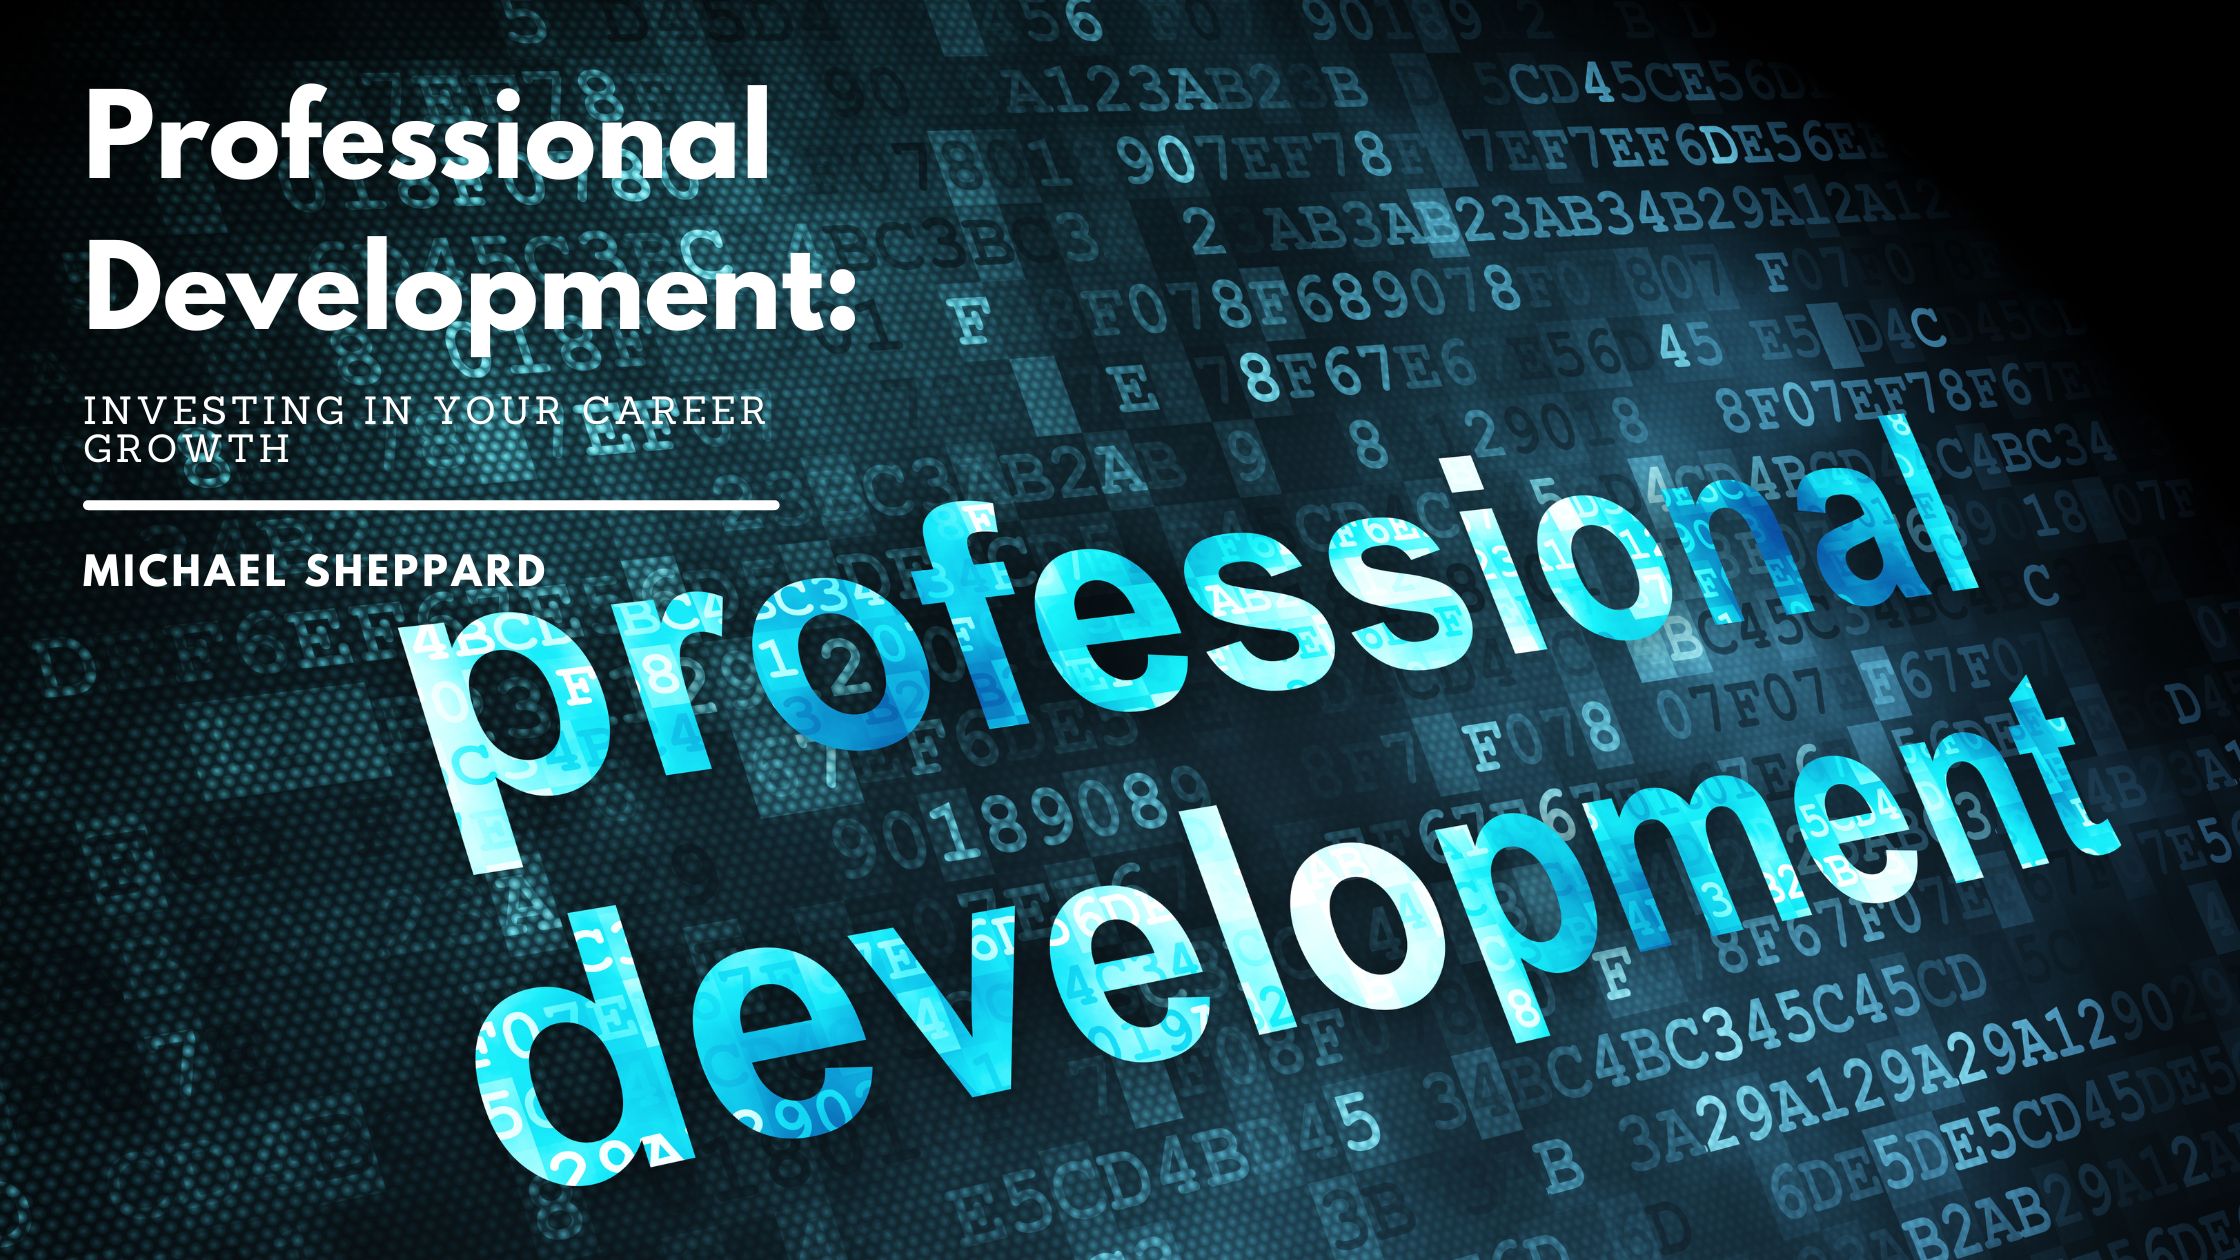 Professional Development: Investing in Your Career Growth